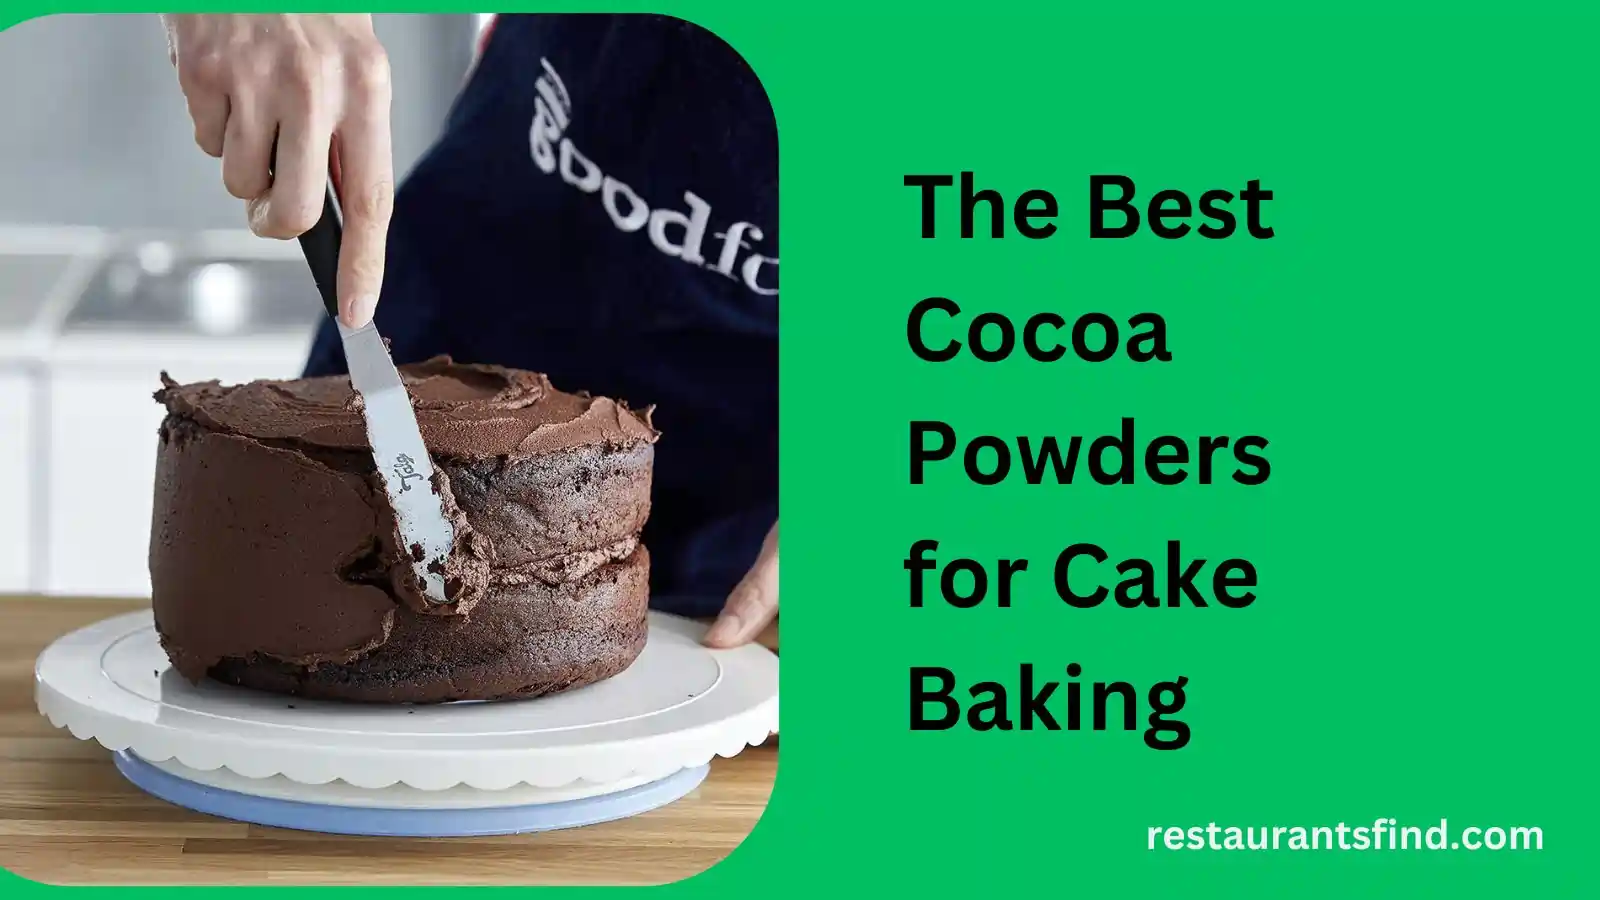 Best Cocoa Powders for Cake Baking